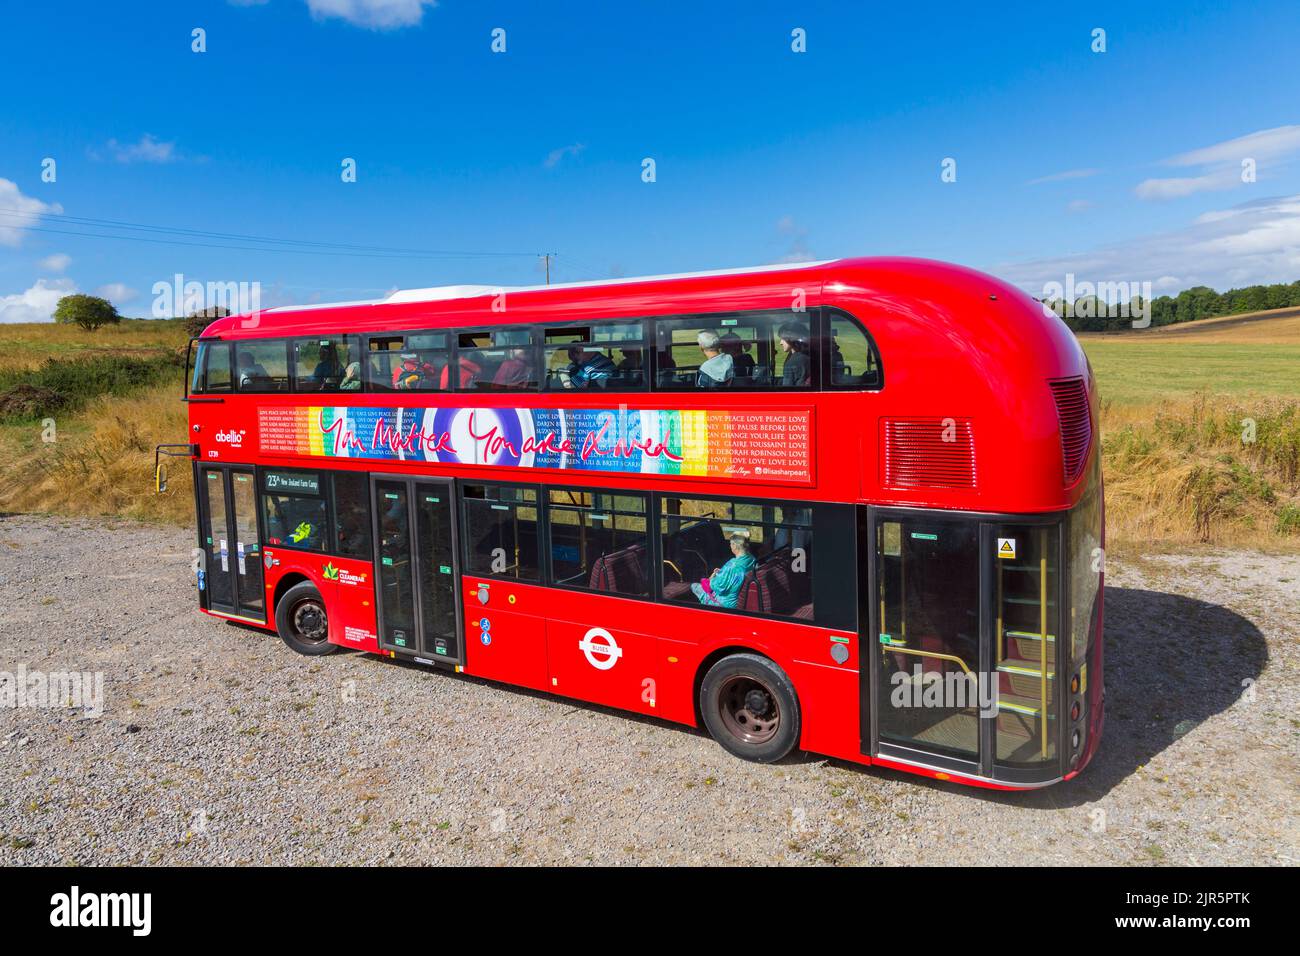 You Matter You Are Loved message on side of Hybrid CleanerAir for London abellio LT39 red double decker bus Stock Photo